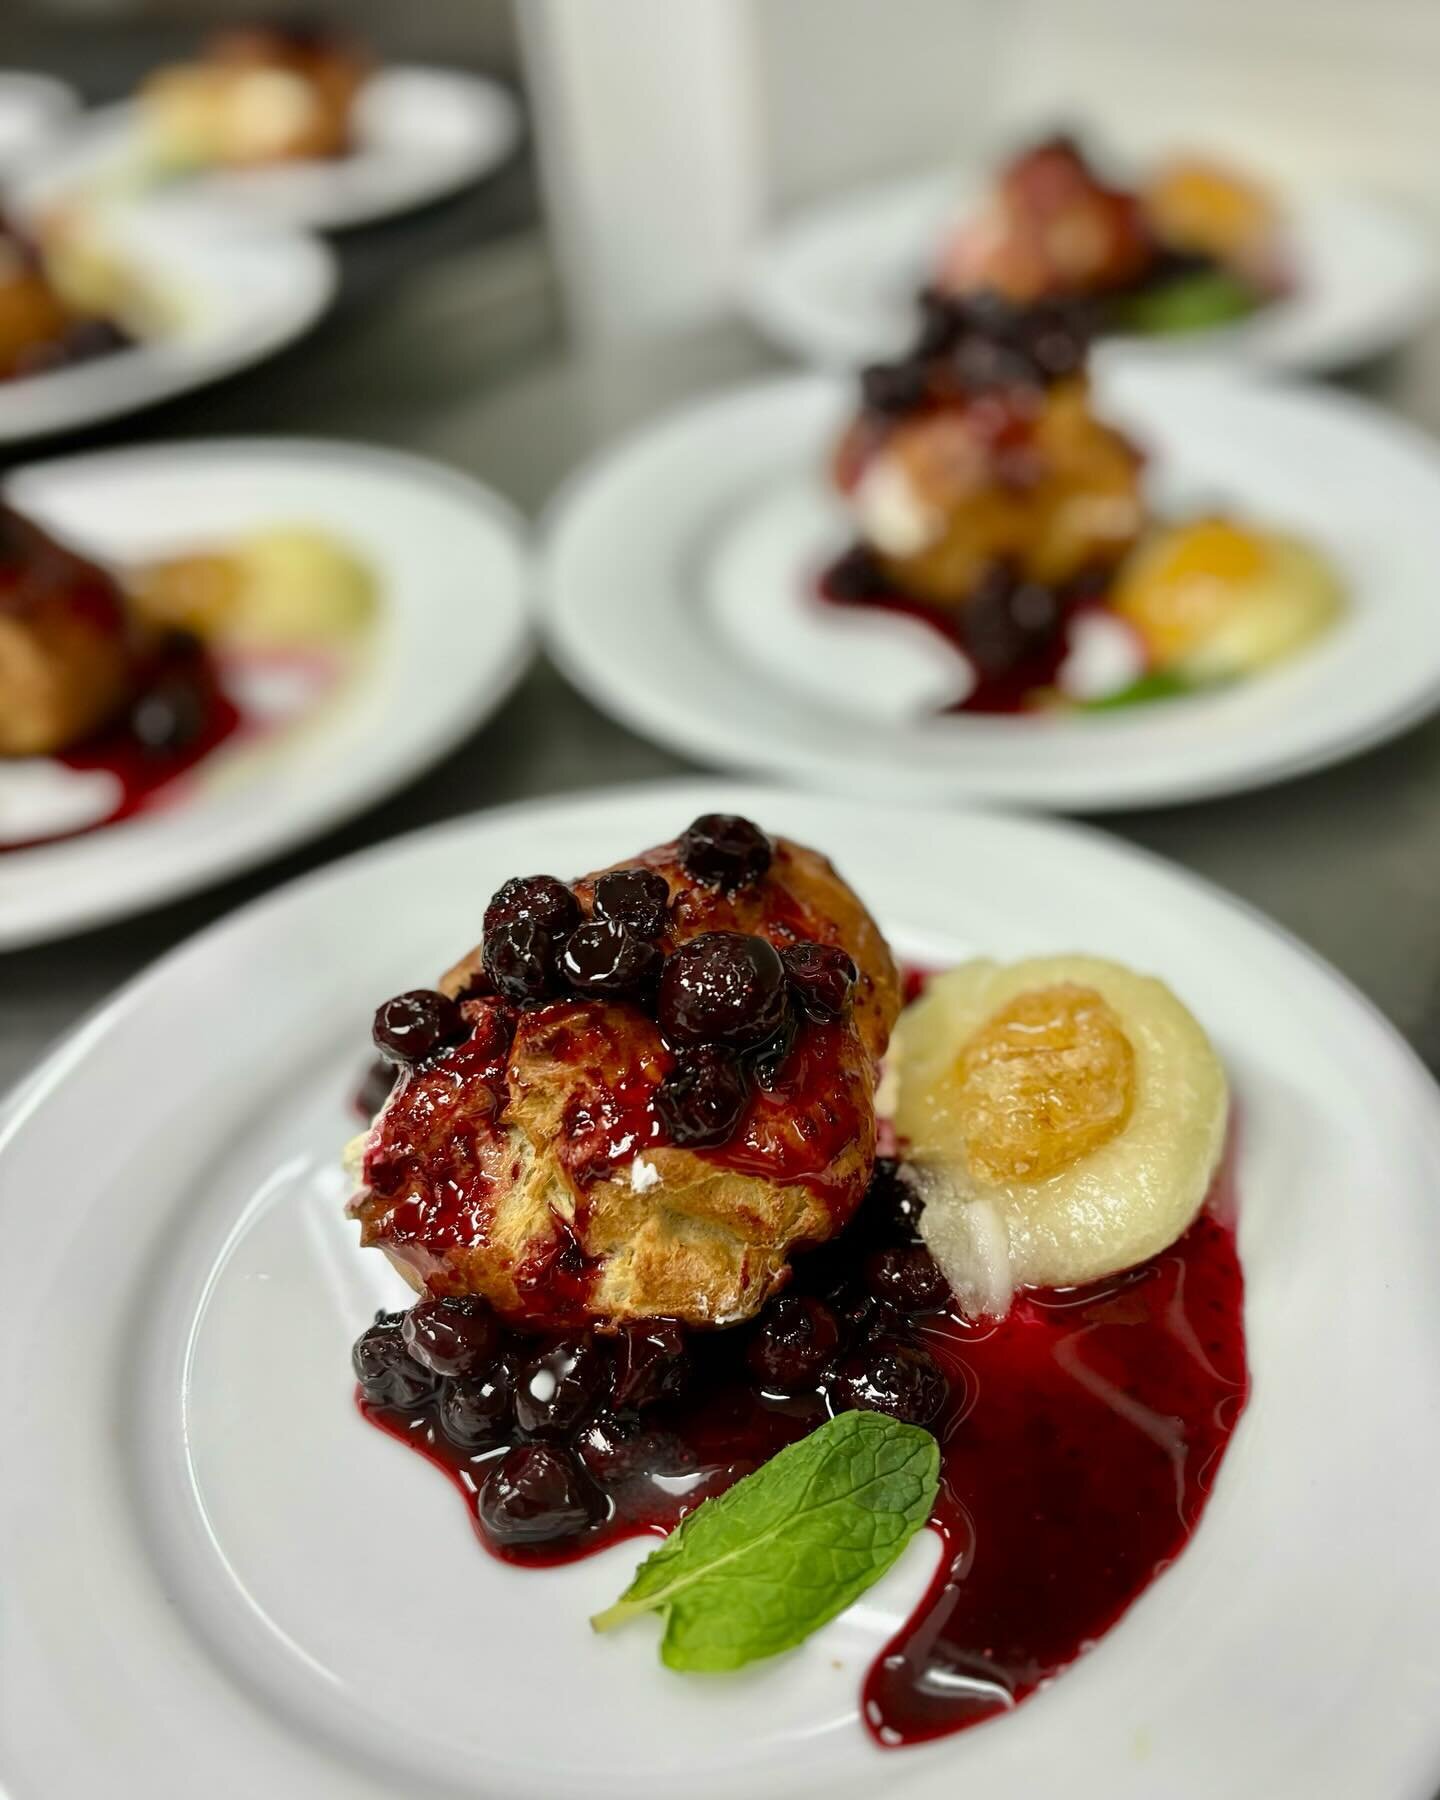 Had an incredible time at our wine dinner last Saturday! Feast your eyes on this mouthwatering dessert: Blueberry Lemon Profiteroles accompanied by Honeycomb and Mint Sorbet. 🍋🍇🍨